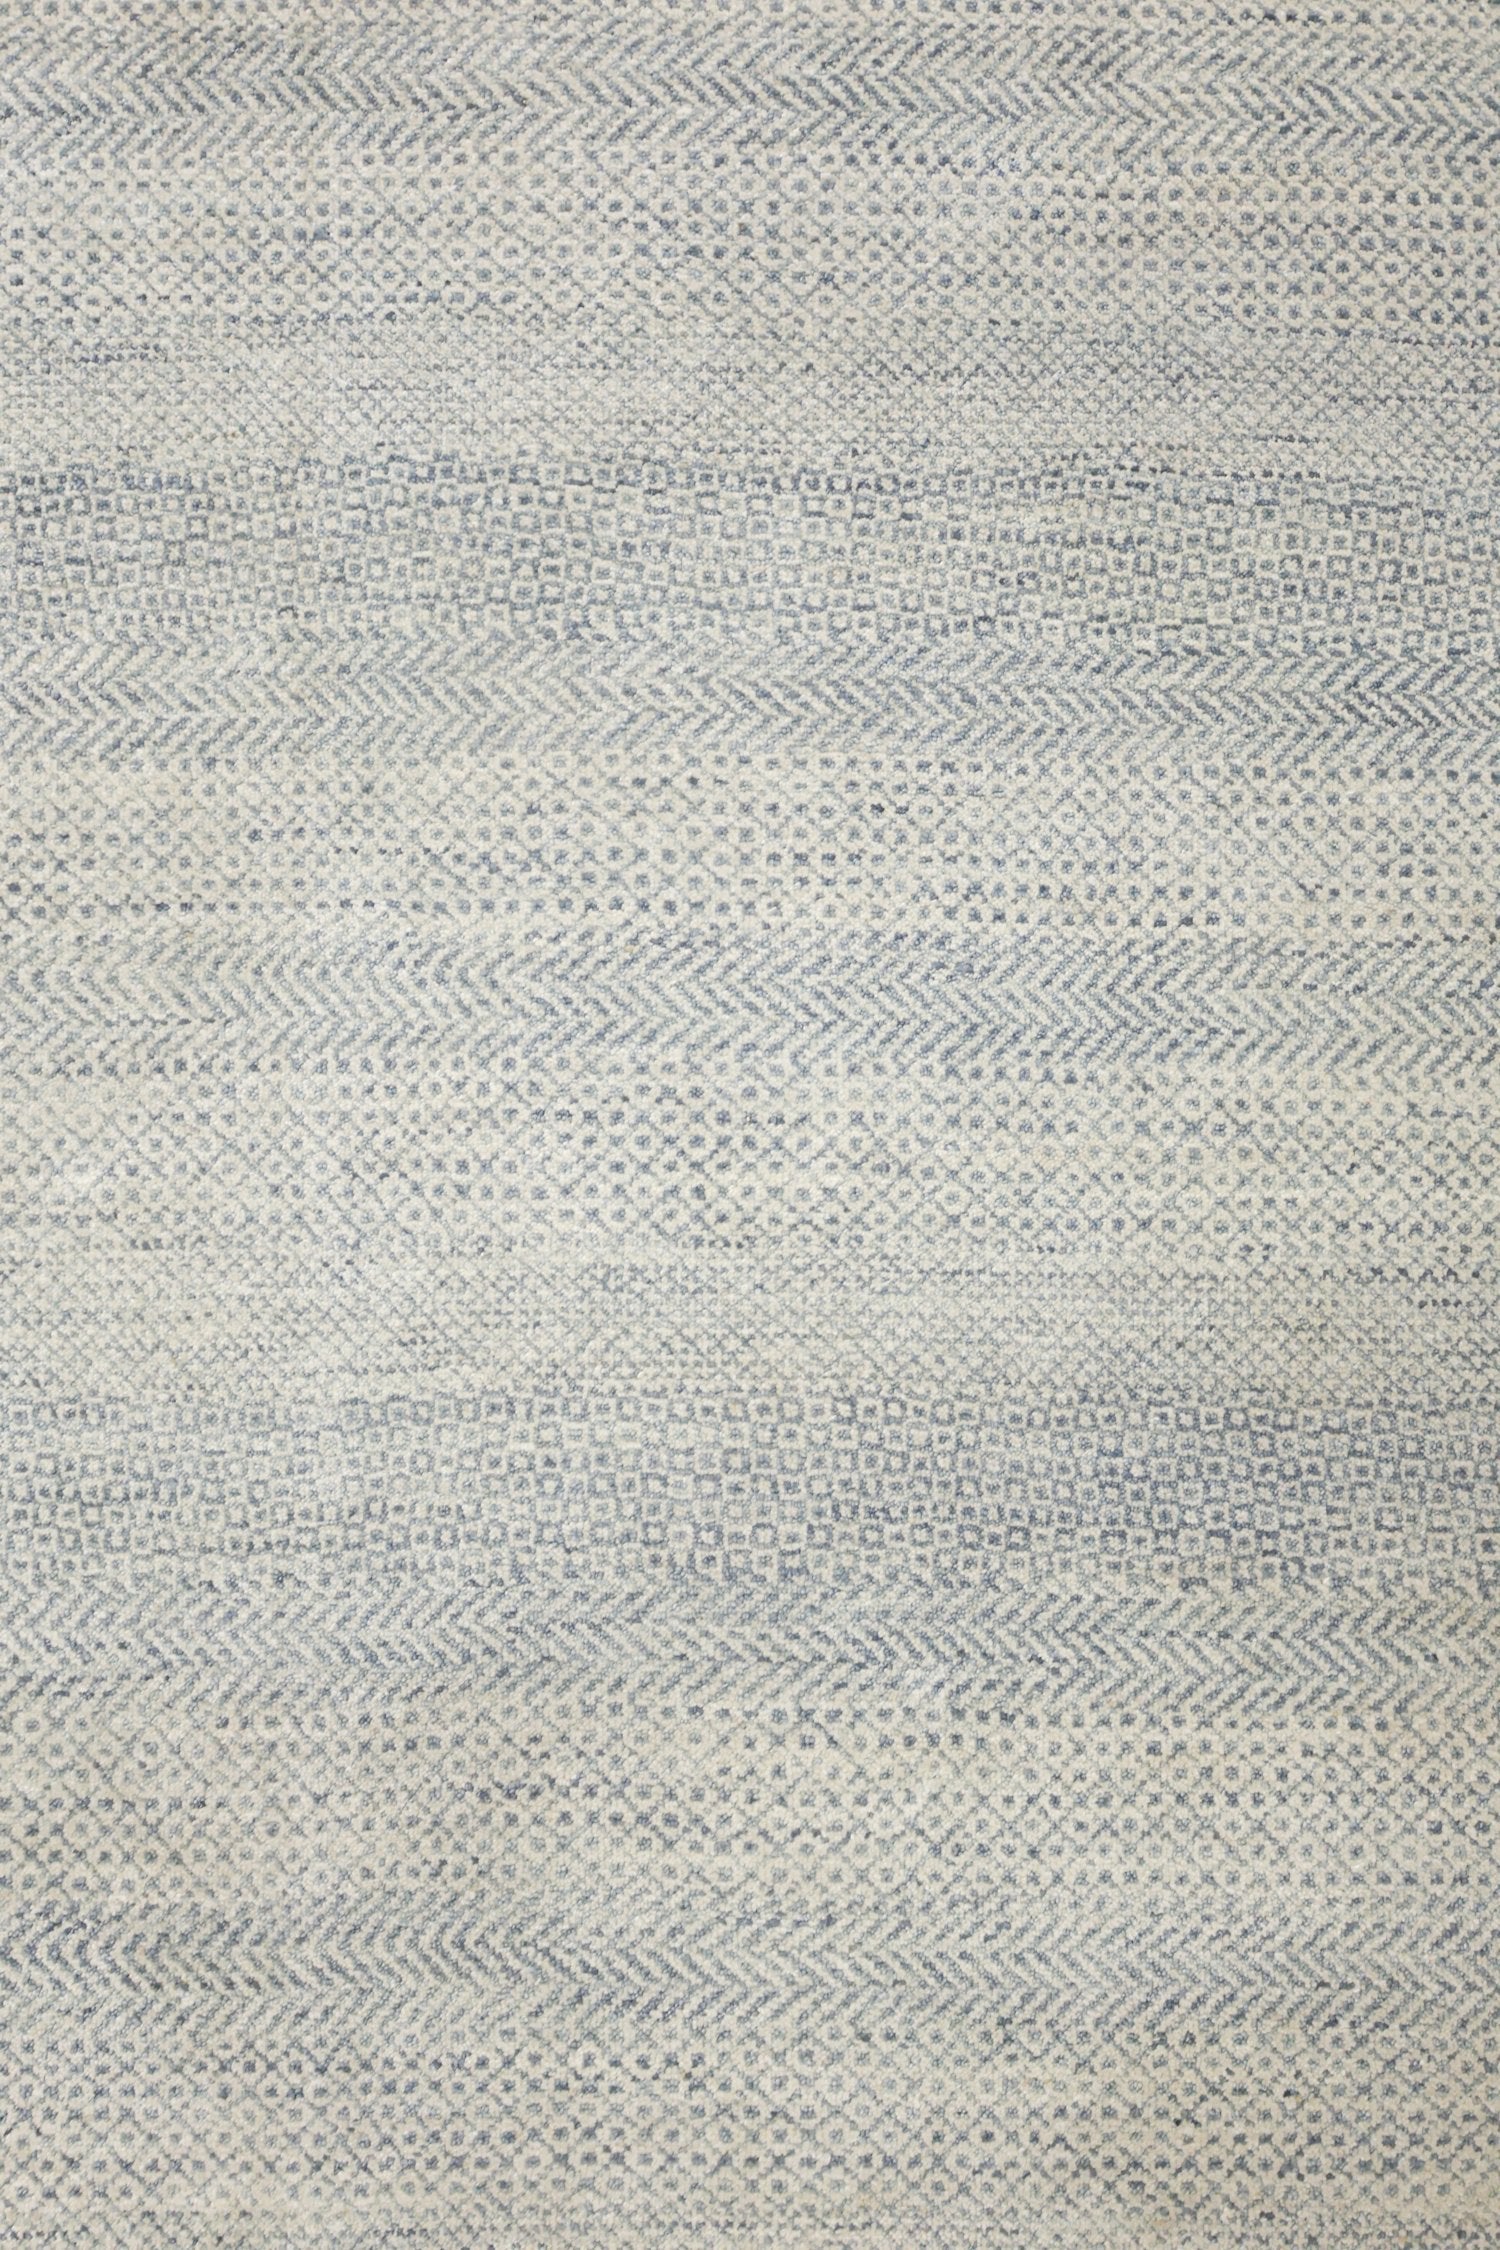 Illusion Nomad Handwoven Contemporary Rug, J73570